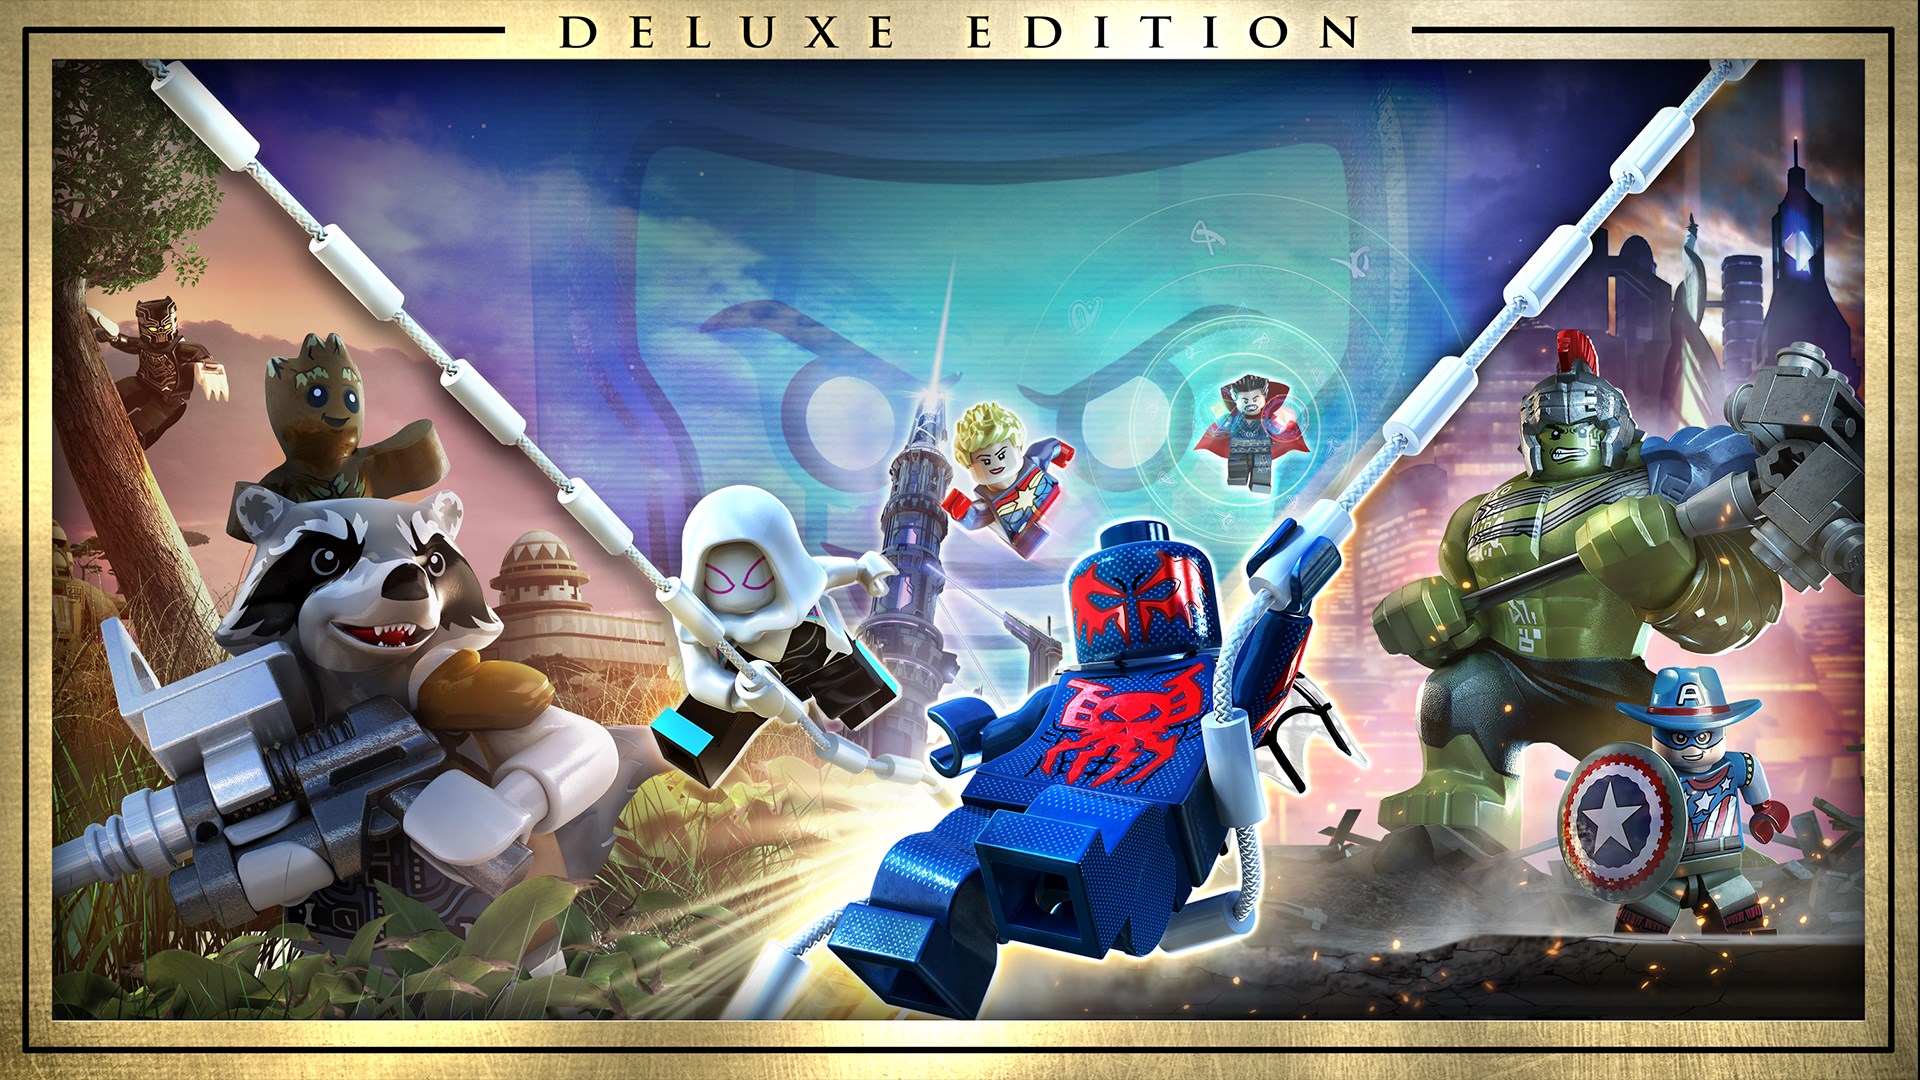 Buy Lego Marvel Super Heroes 2 Deluxe Edition Microsoft Store